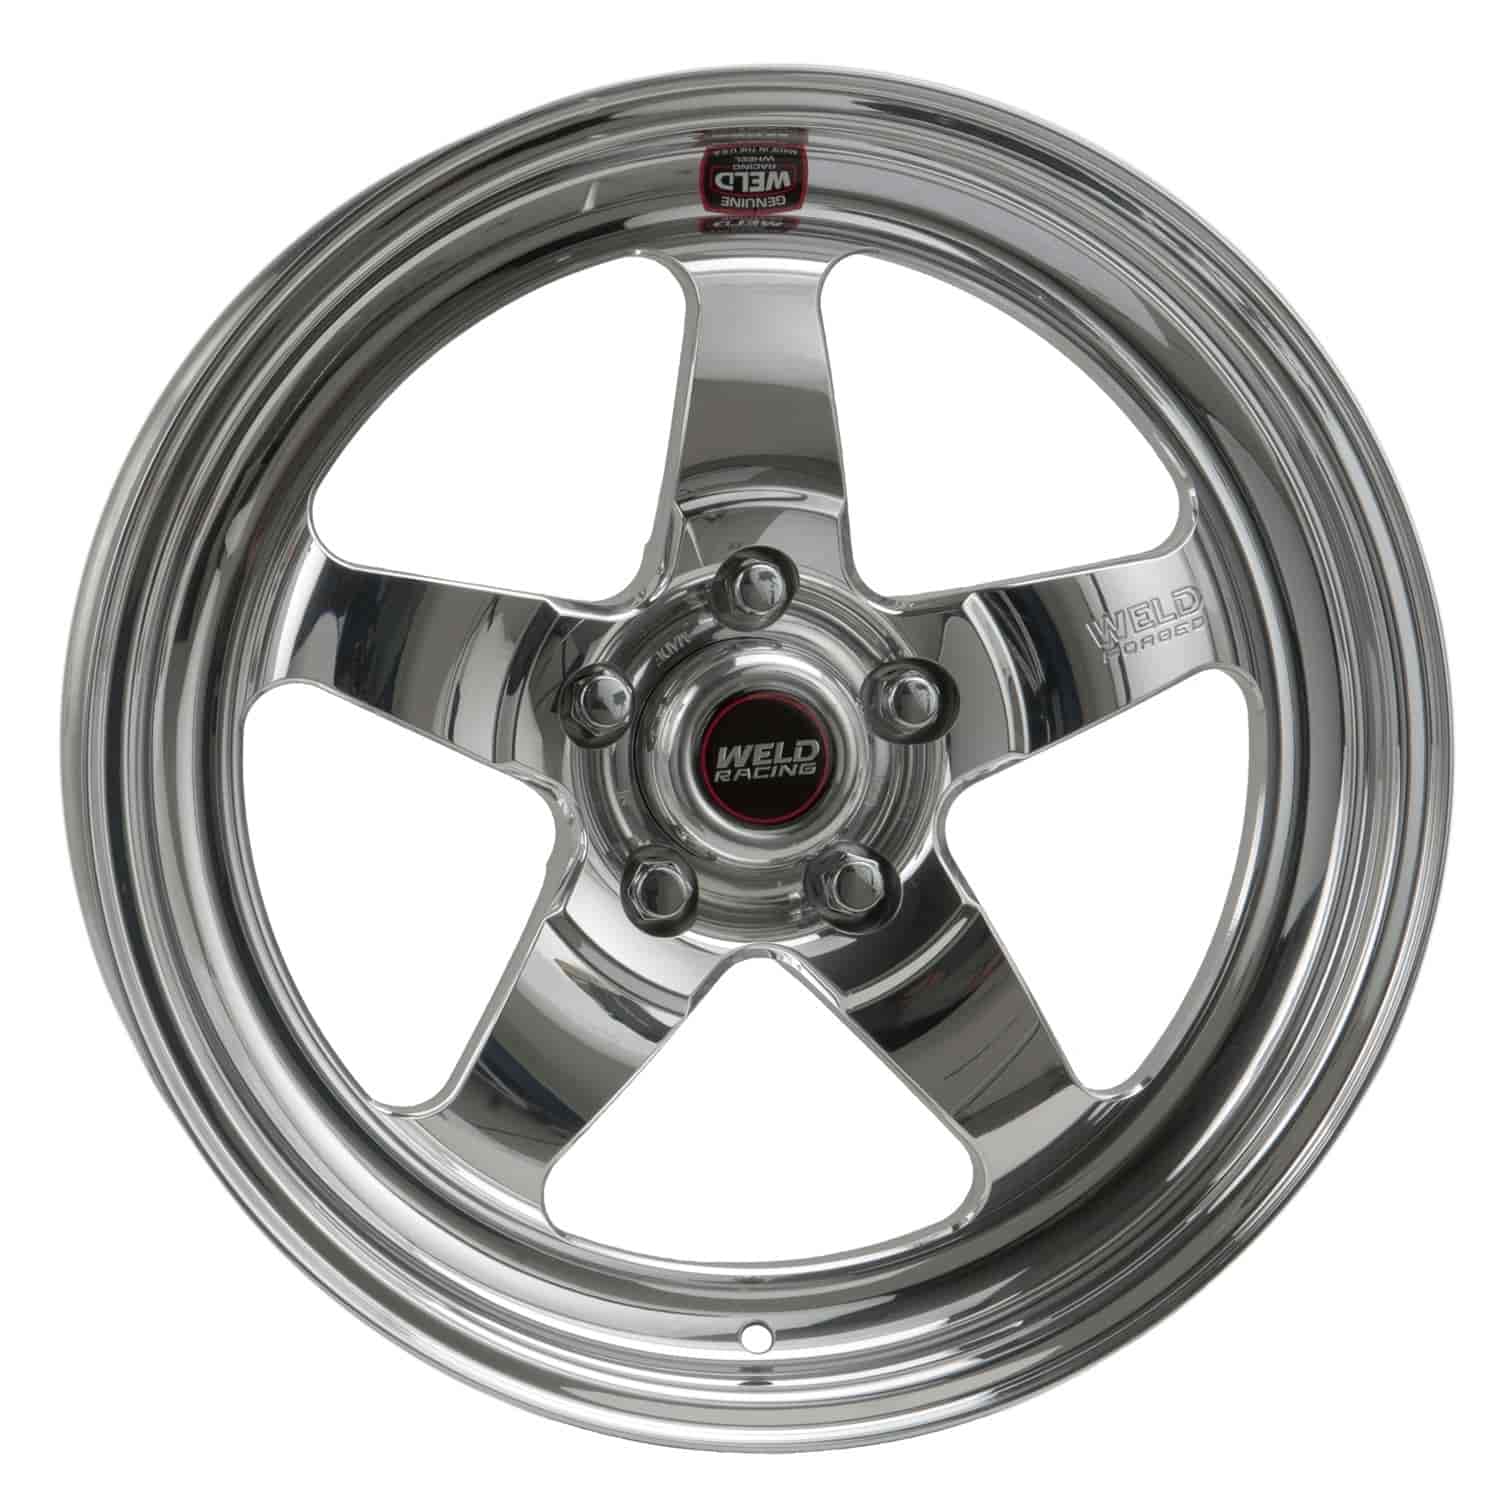 RT-S Series Wheel Size: 17" x 4-1/2" Bolt Circle: 5 x 4-1/2" Rear Spacing: 2.20" Offset: -13.97mm